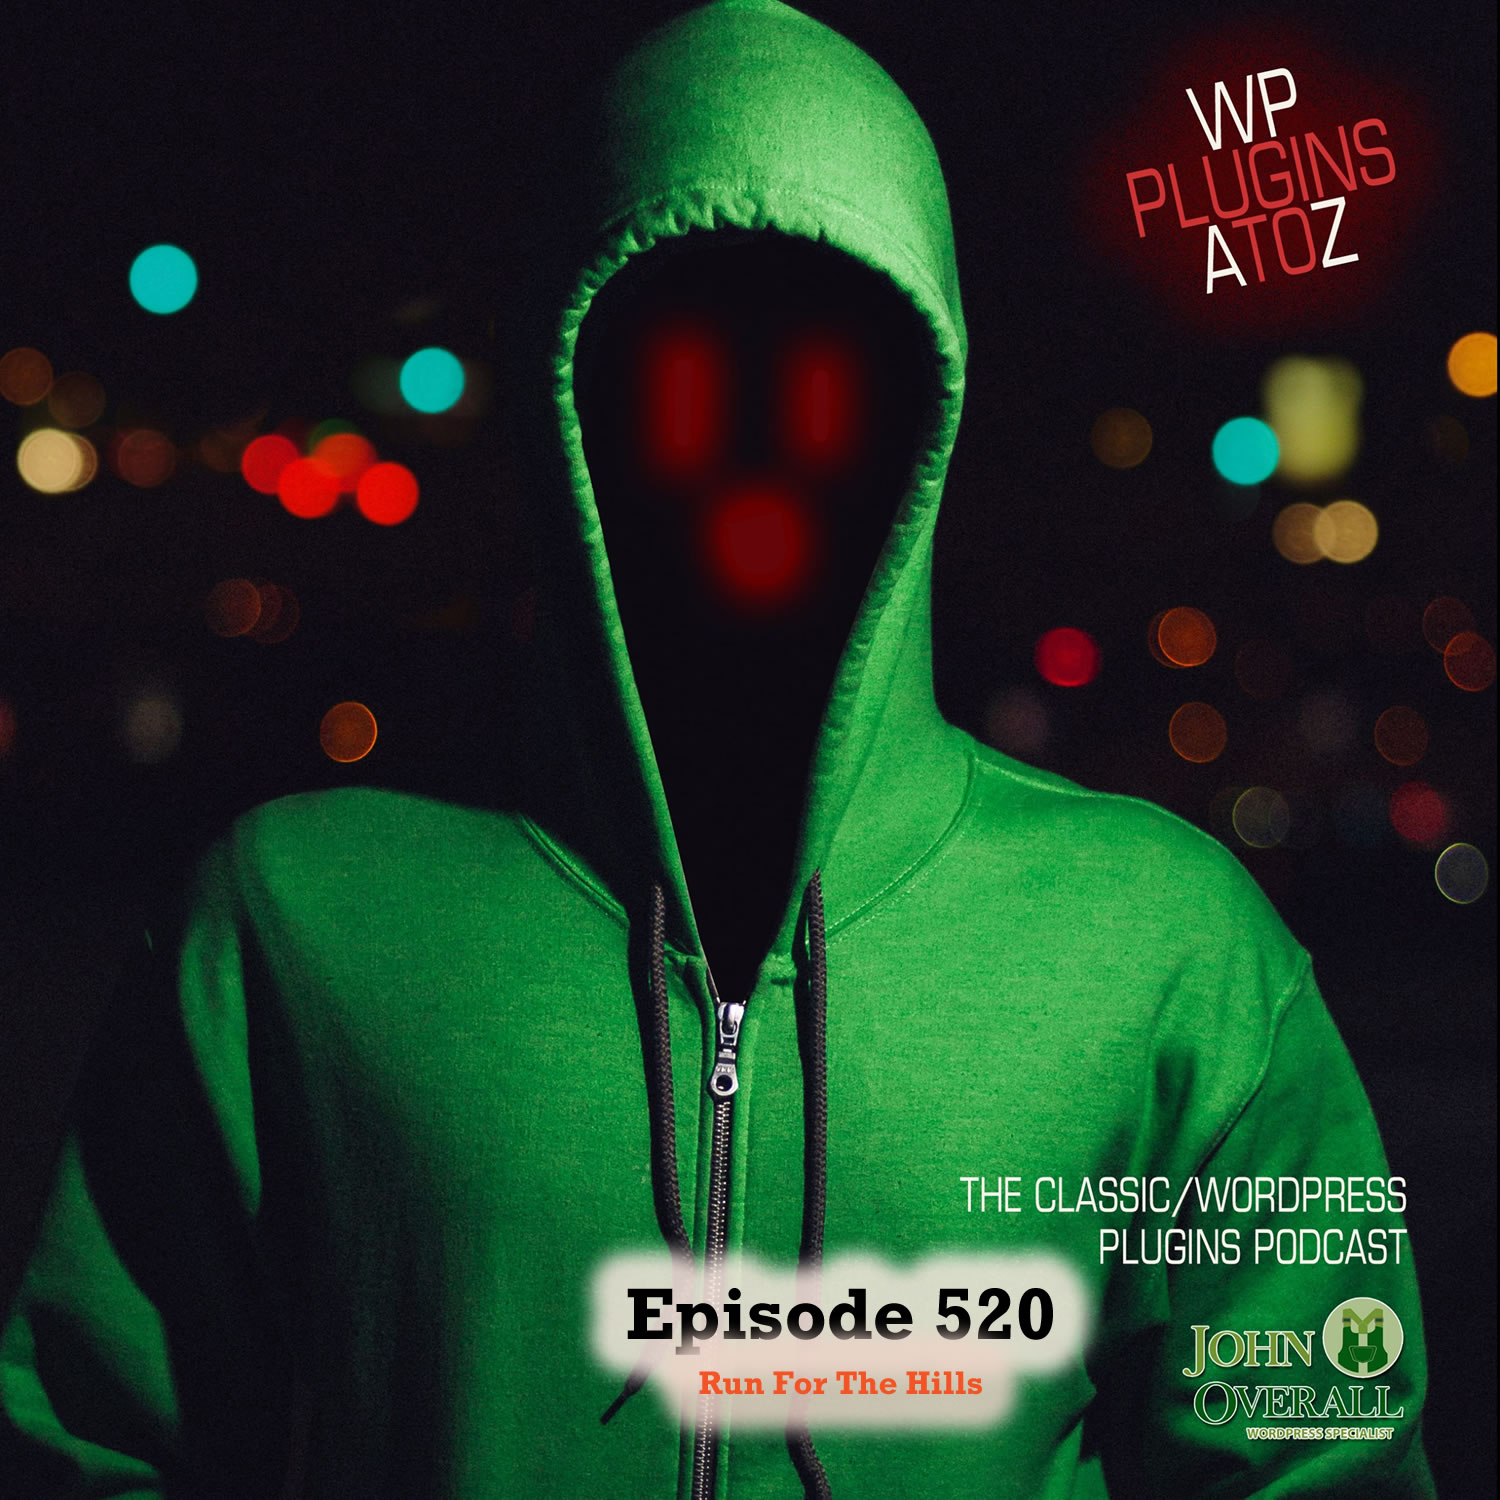 It's Episode 520 - We have plugins for Social Stickiness, Getting back on top, Custom Invoices, Changing Email, Speeding up MySql... and ClassicPress Options. It's all coming up on WordPress Plugins A-Z!